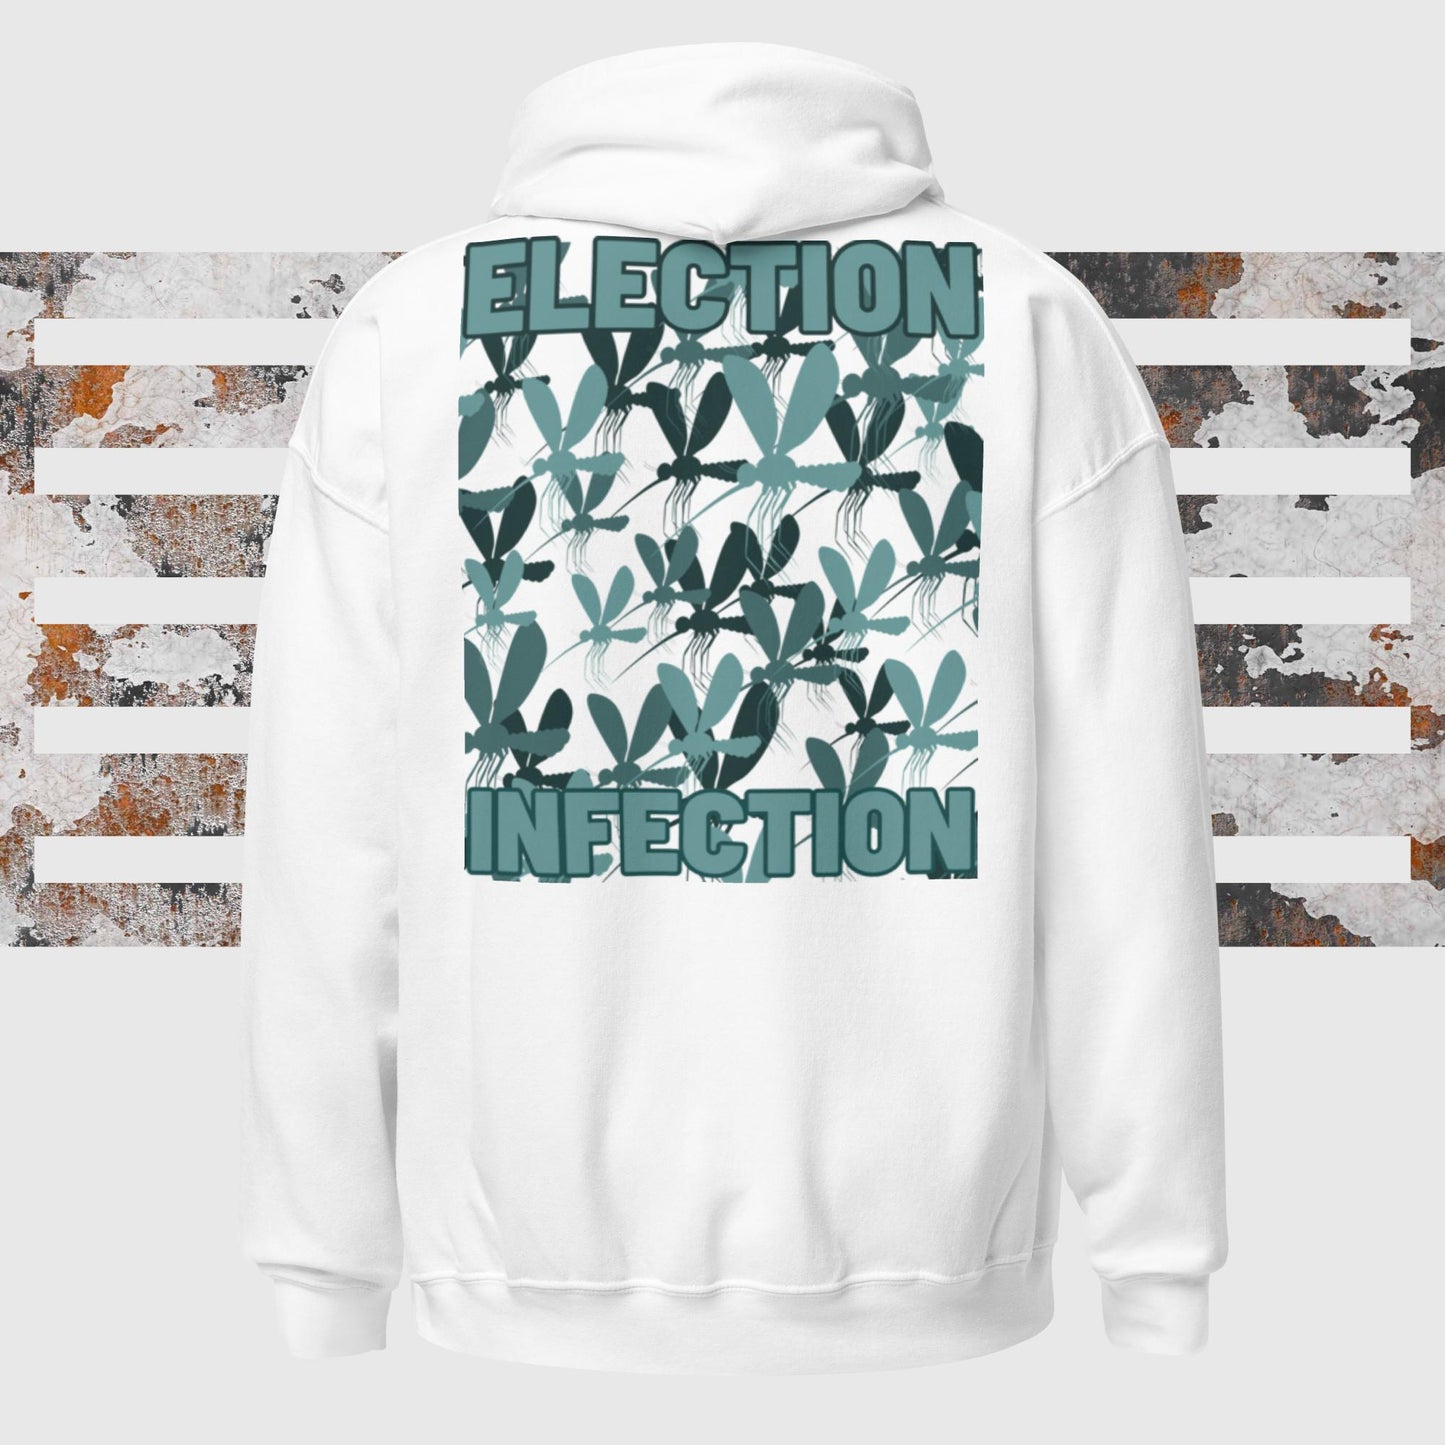 Election Infection Hoodie